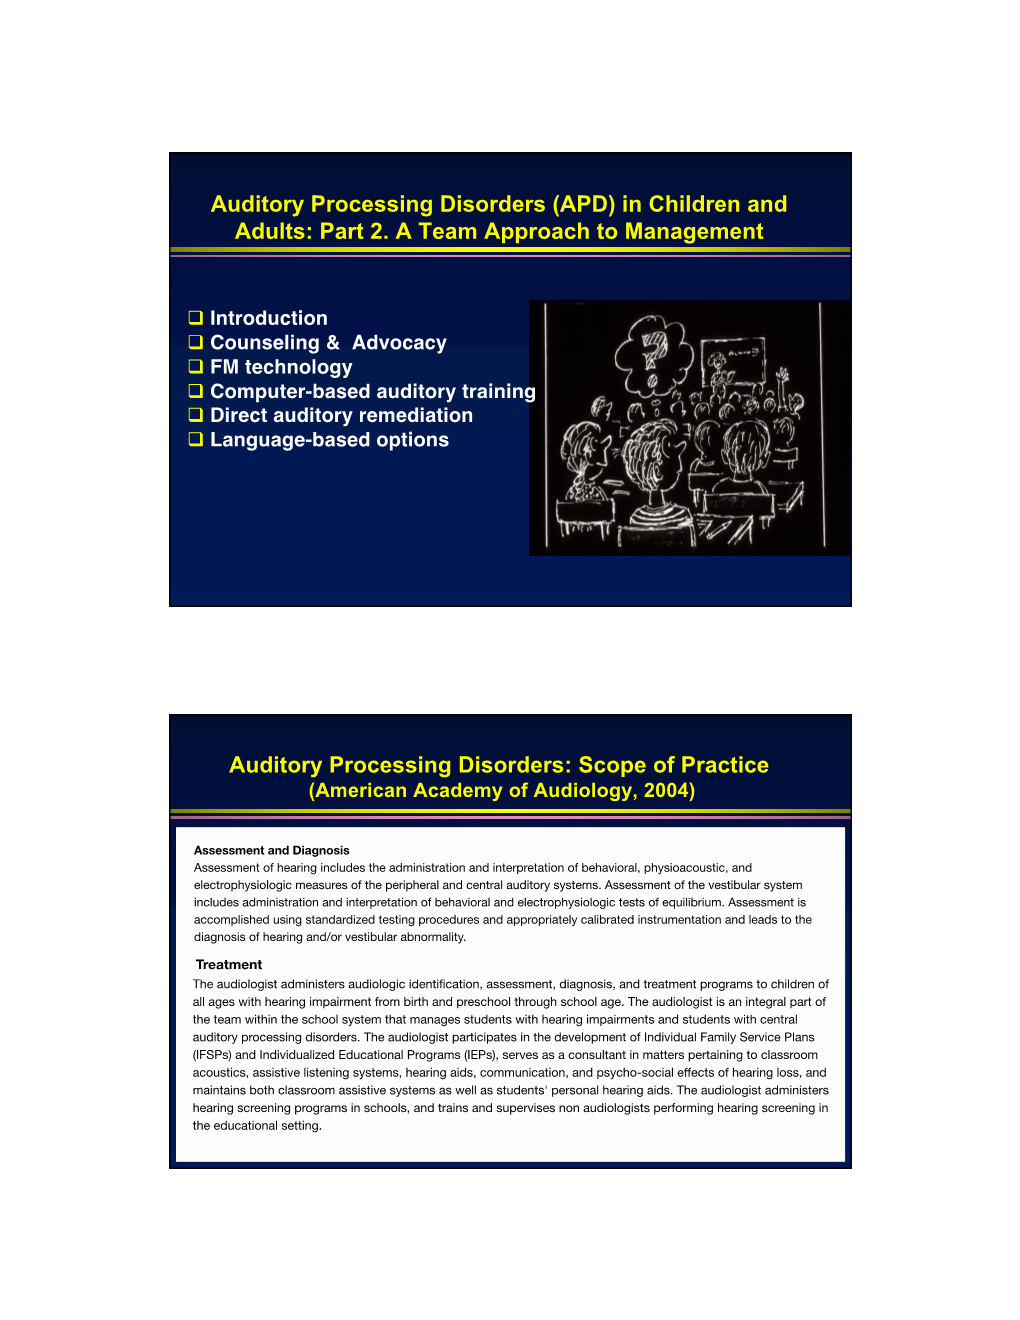 Auditory Processing Disorders (APD) in Children and Adults: Part 2